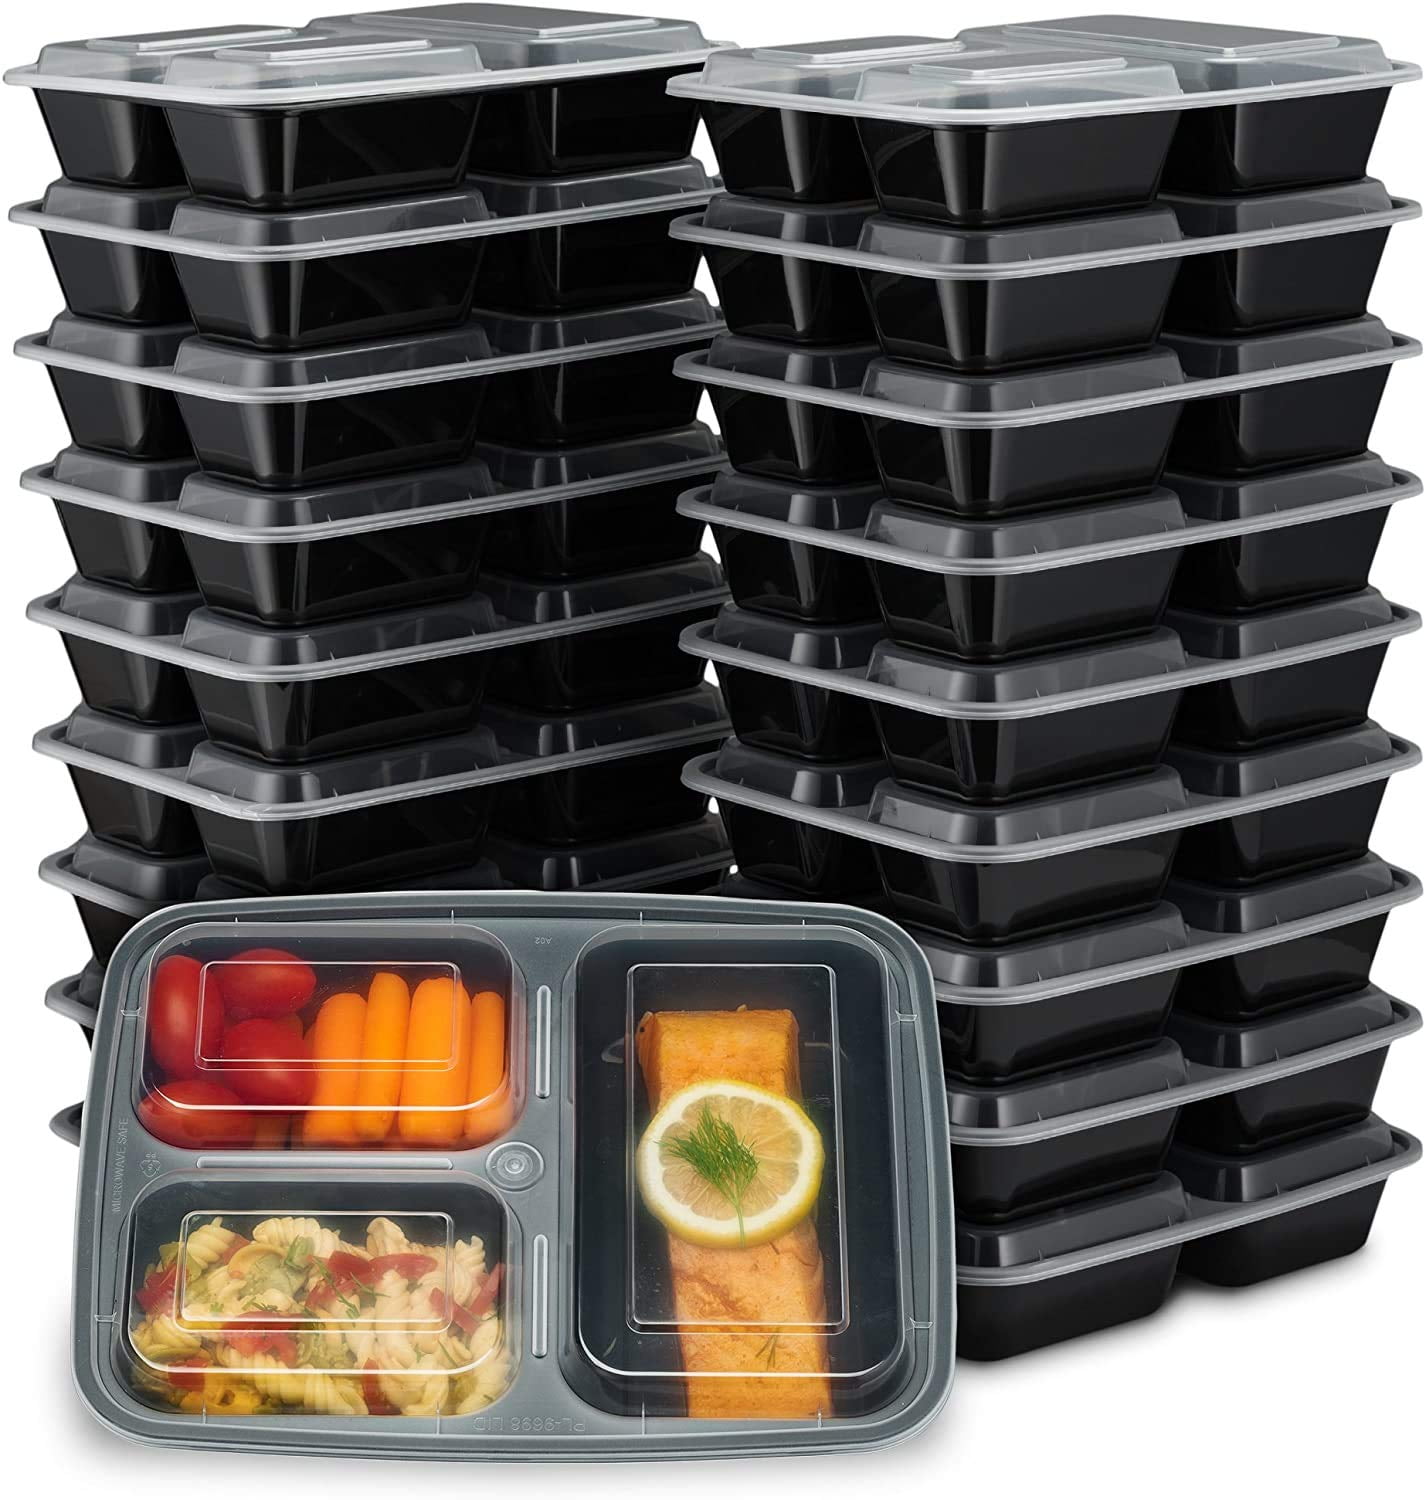 CtC 26oz Meal Prep Container Bento Box Adult Lunch Box with Lid | Microwave Safe BPA Free Heavy Duty Food Storage Containers Leakproof Plastic Snack